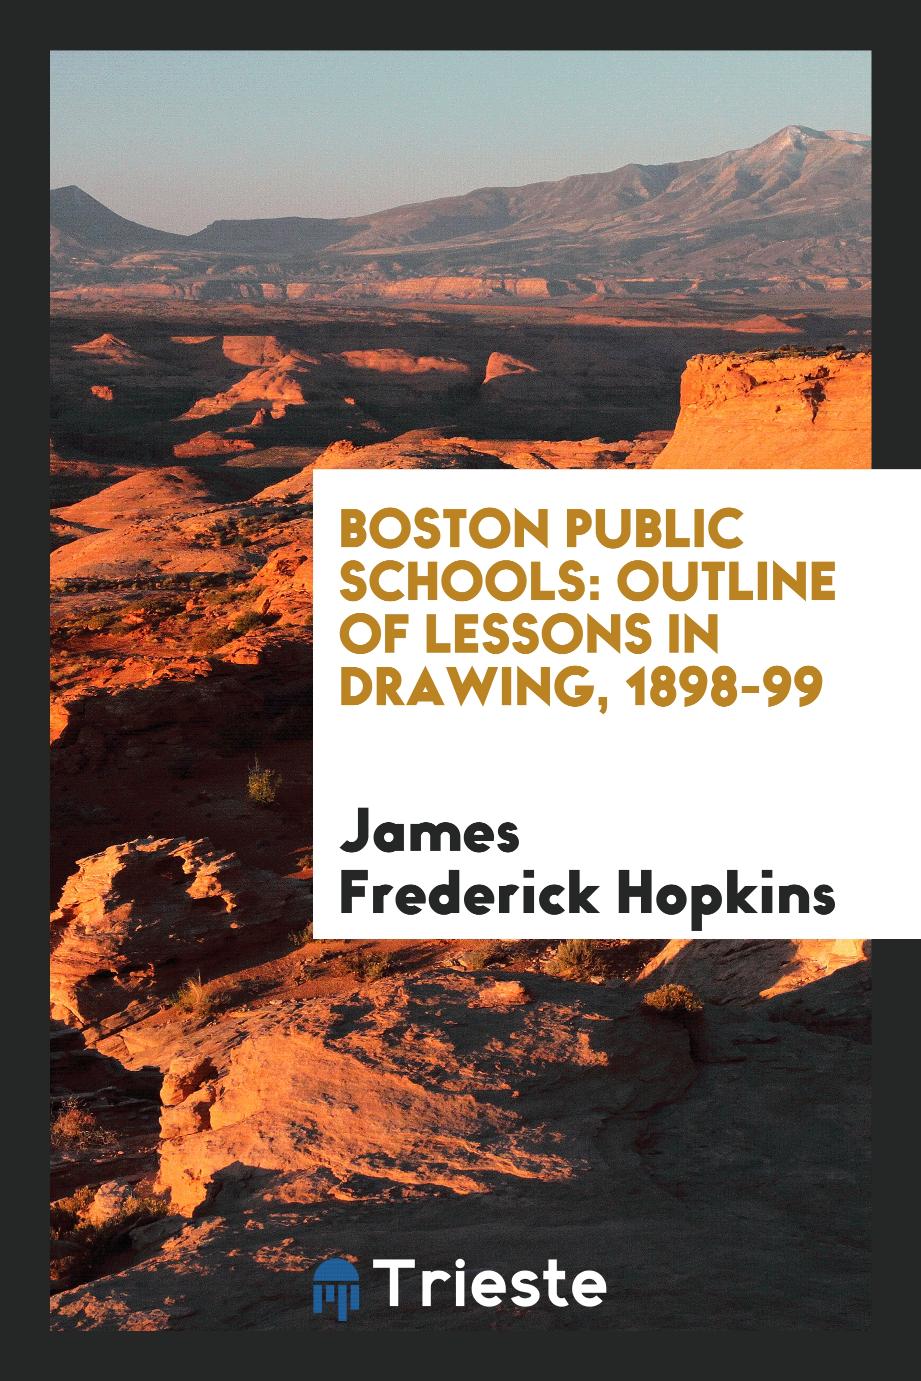 Boston Public Schools: Outline of Lessons in Drawing, 1898-99